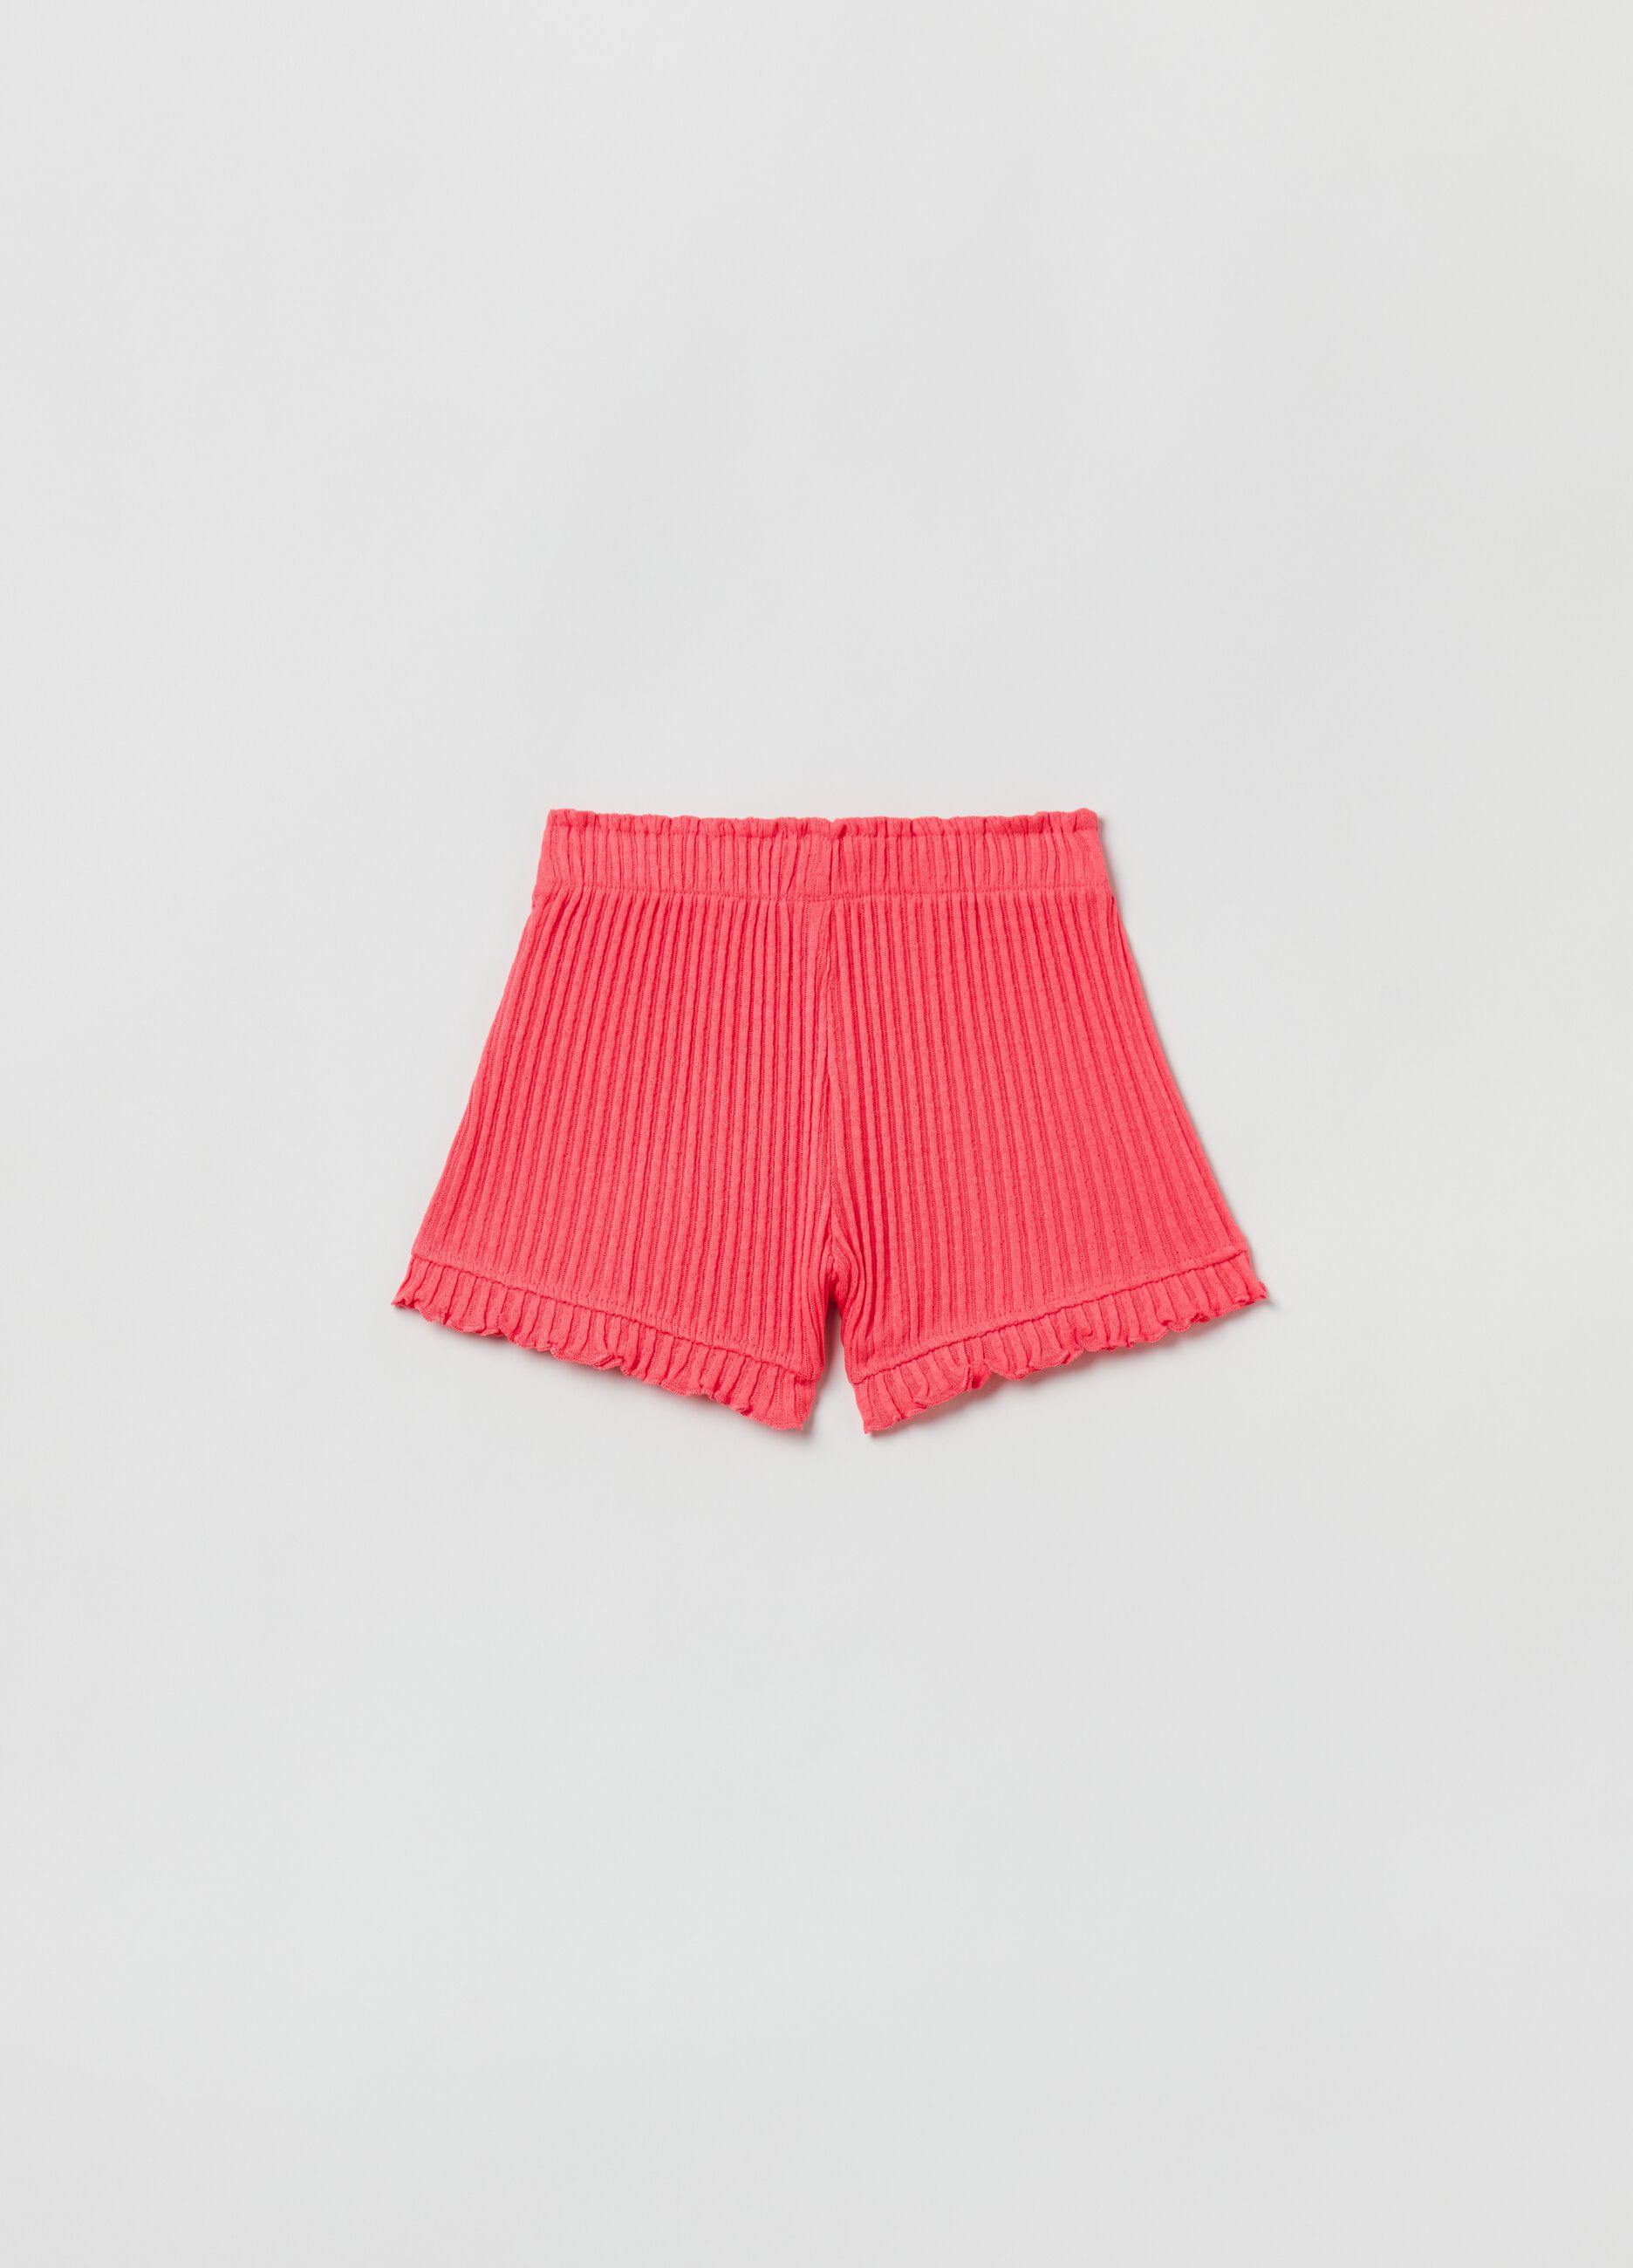 Shorts in textured fabric with ribbing